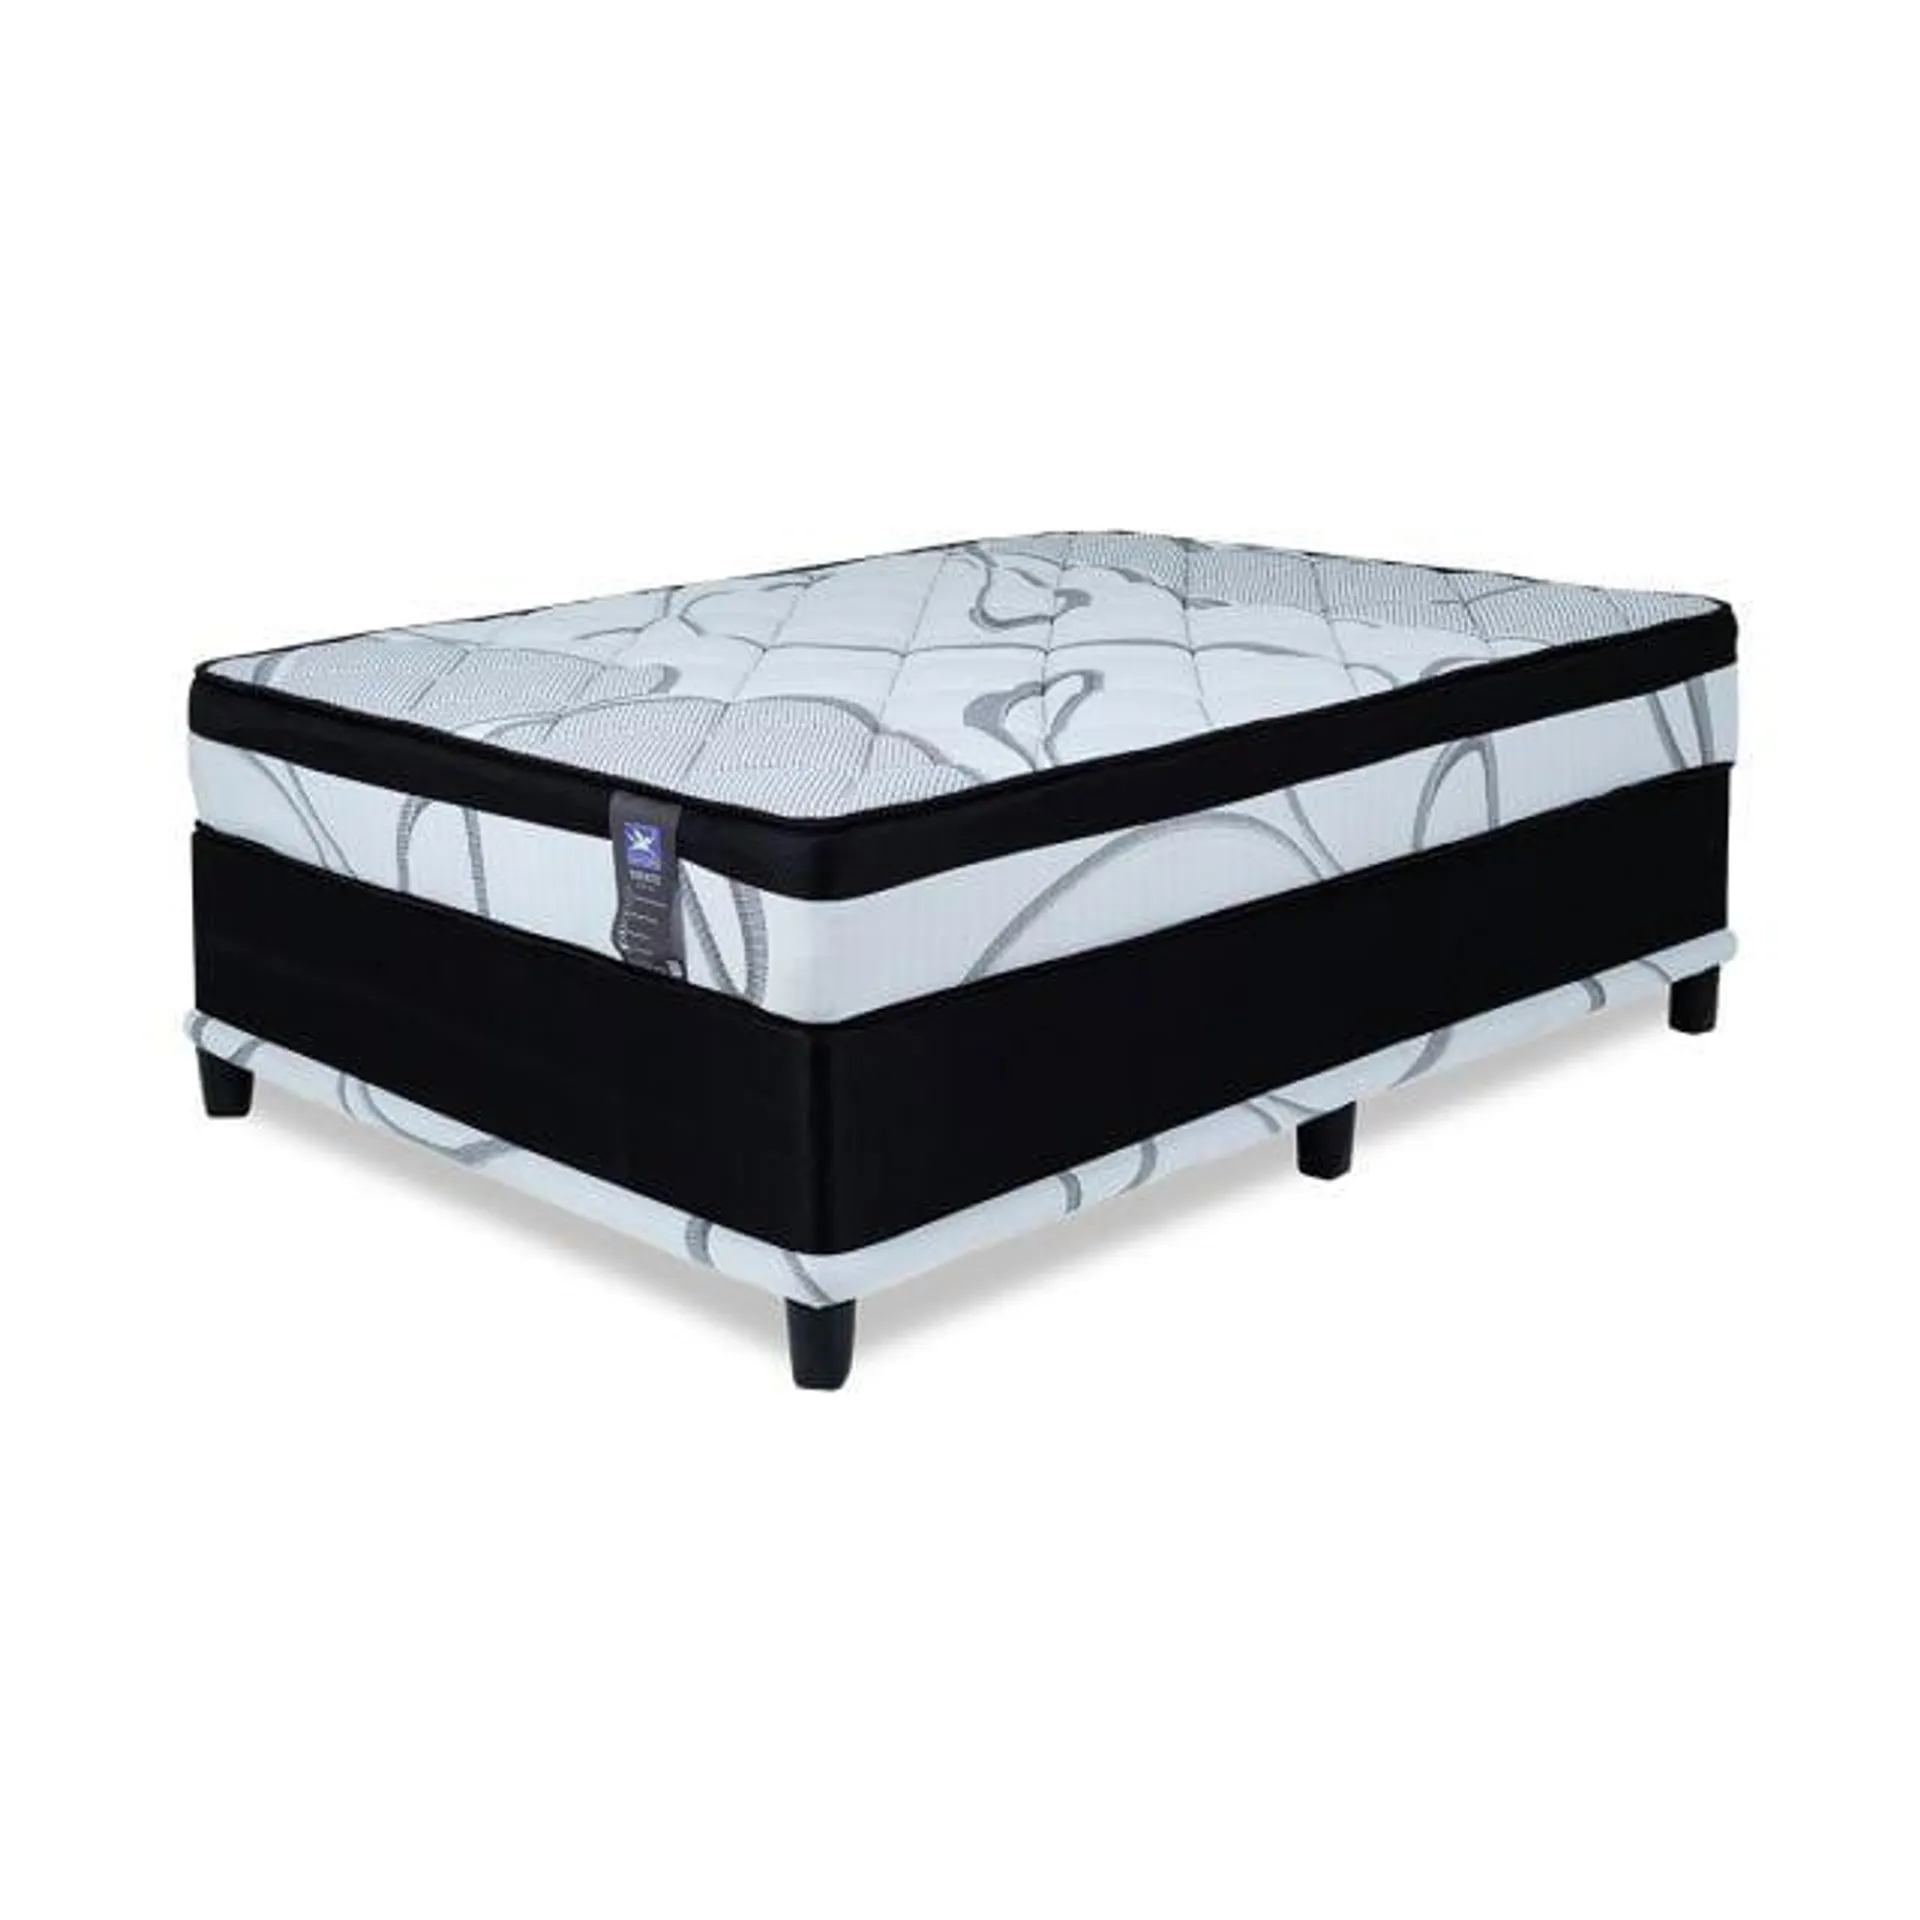 Trento Double Mattress and Bed Set